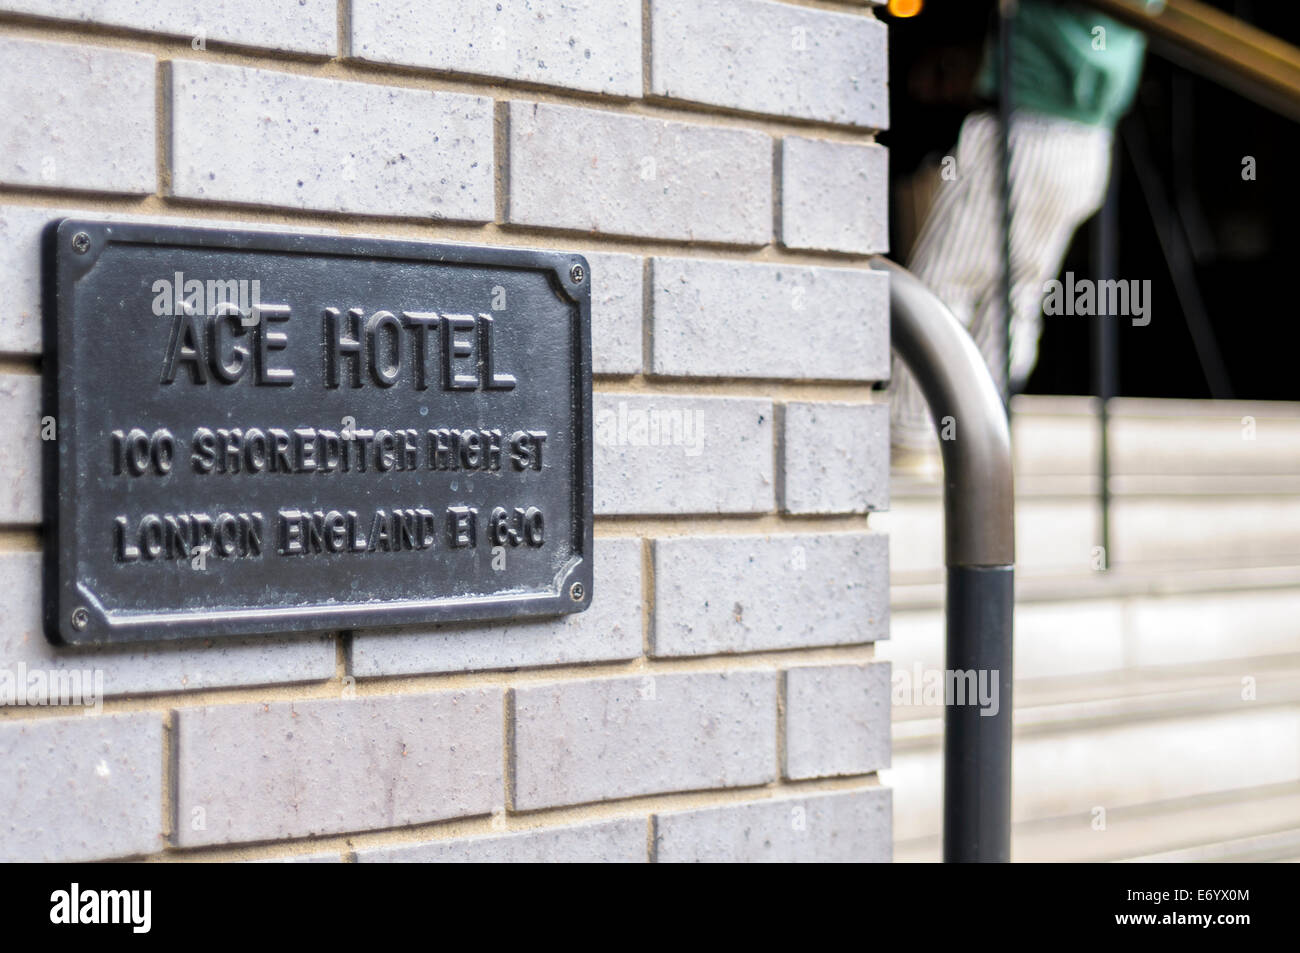 Close up of the iron Plate of the Ace Hotel, Shoreditch Stock Photo